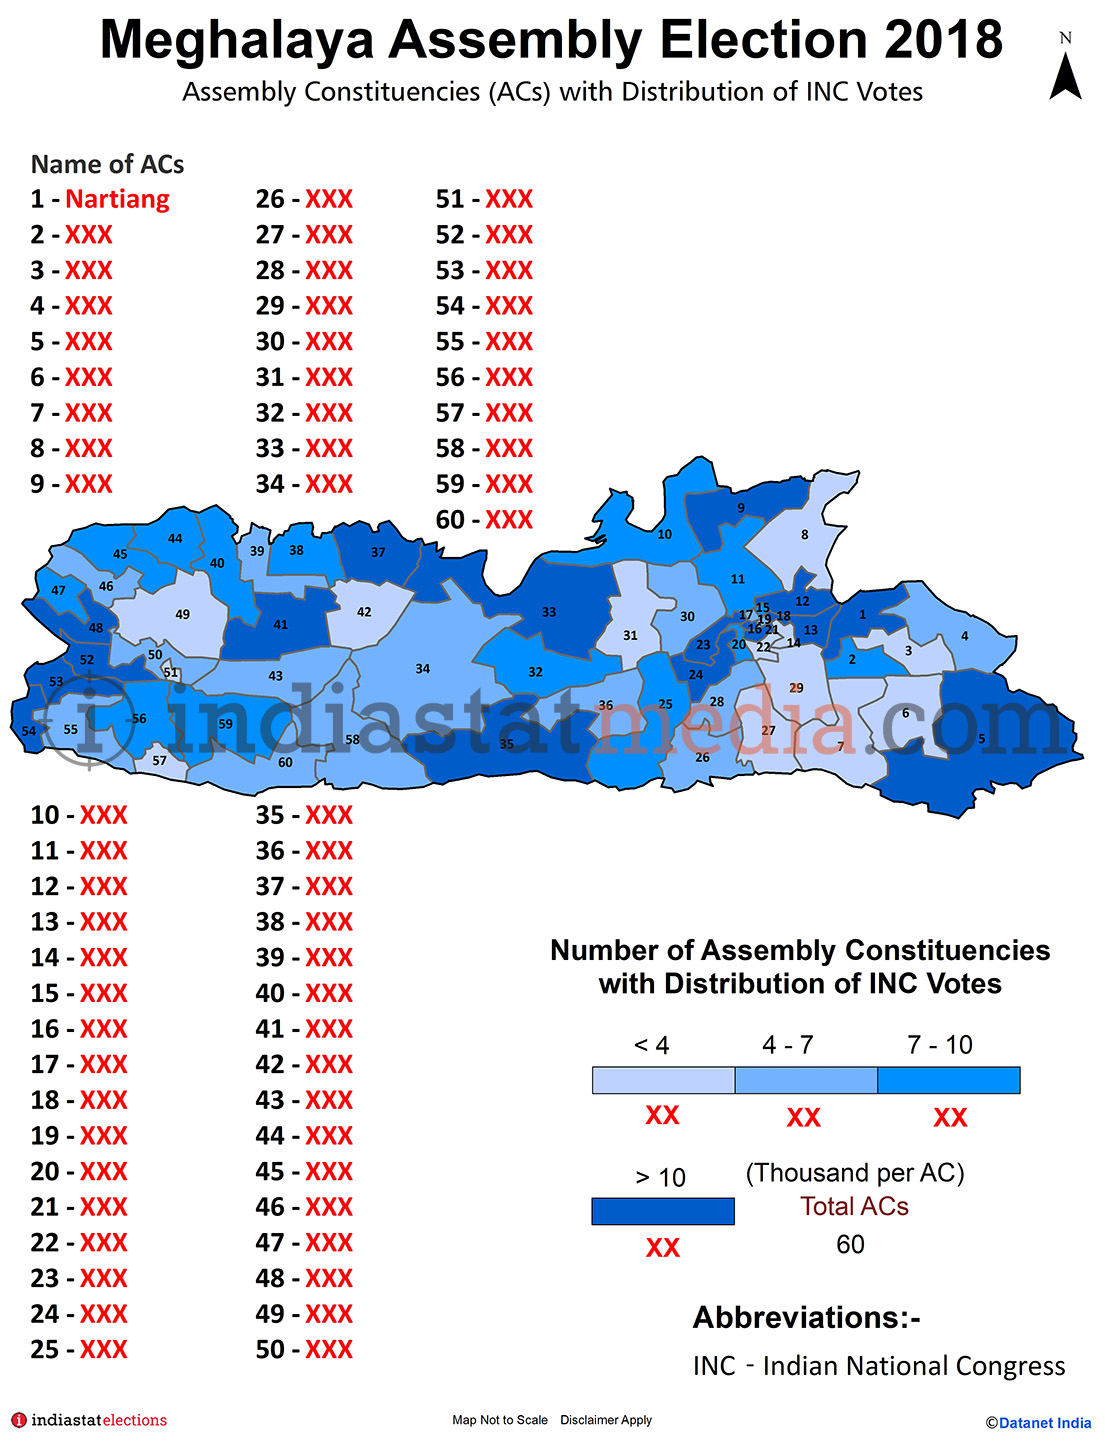 Distribution of INC Votes by Constituencies in Meghalaya (Assembly Election - 2018)